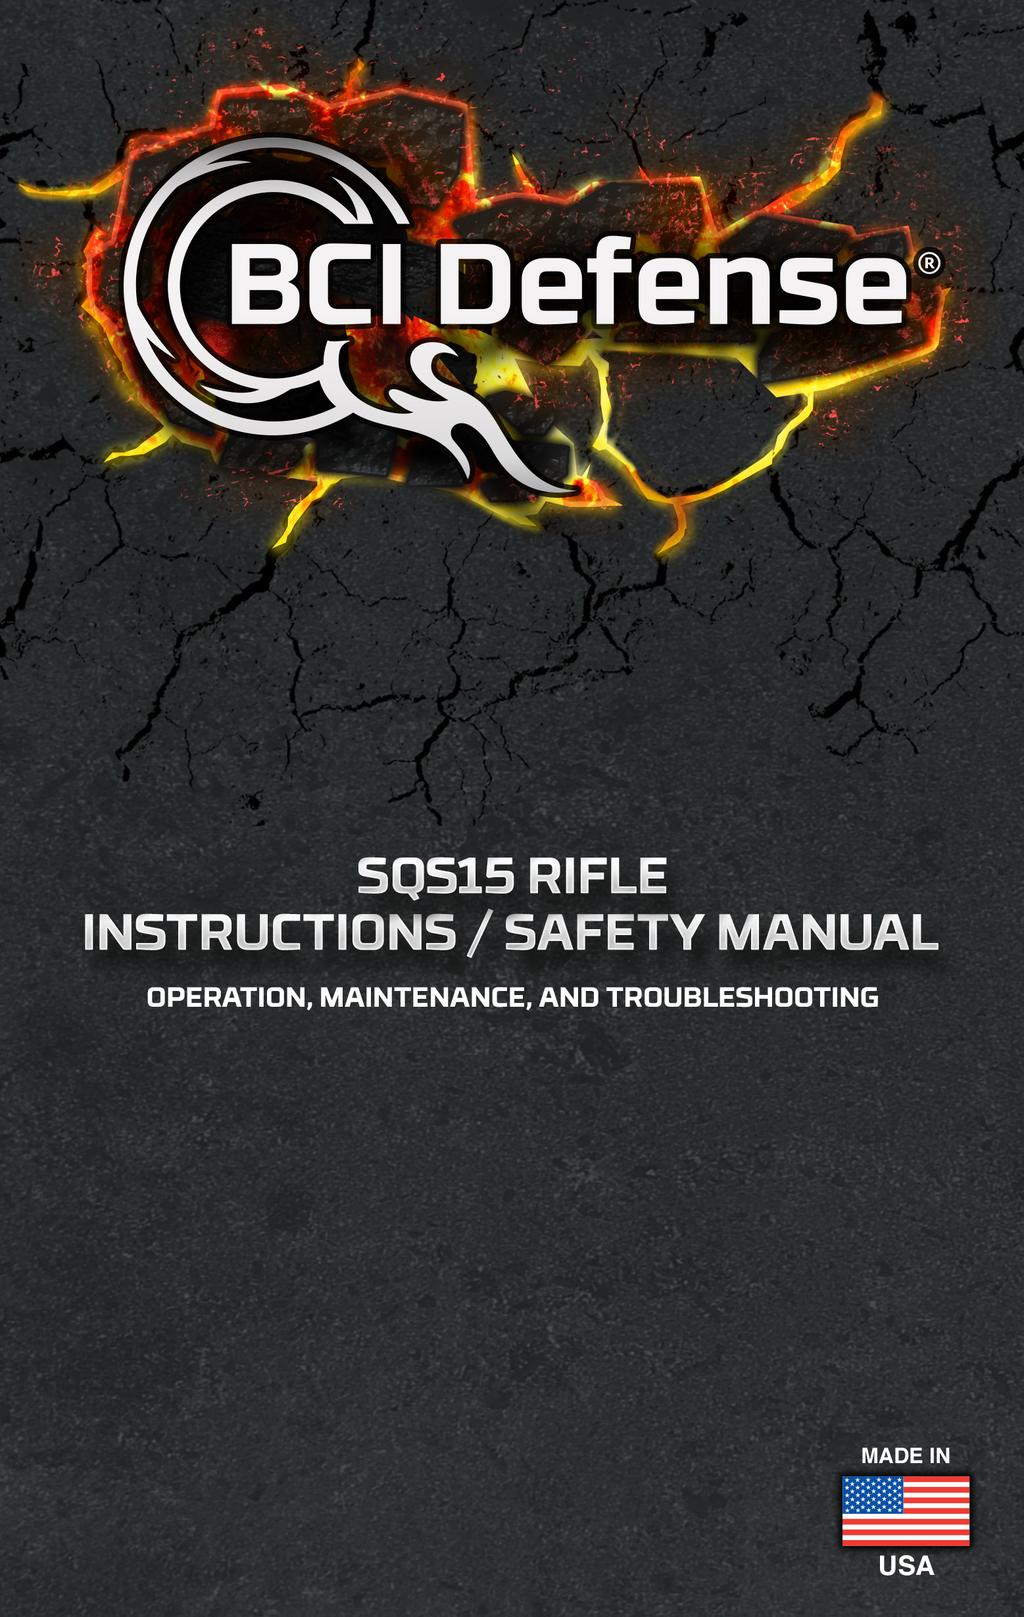 IMPORTANT This manual contains operating, care, and maintenance instructions. To assure safe operation, any user of this firearm must read and understand this manual before using the firearm.